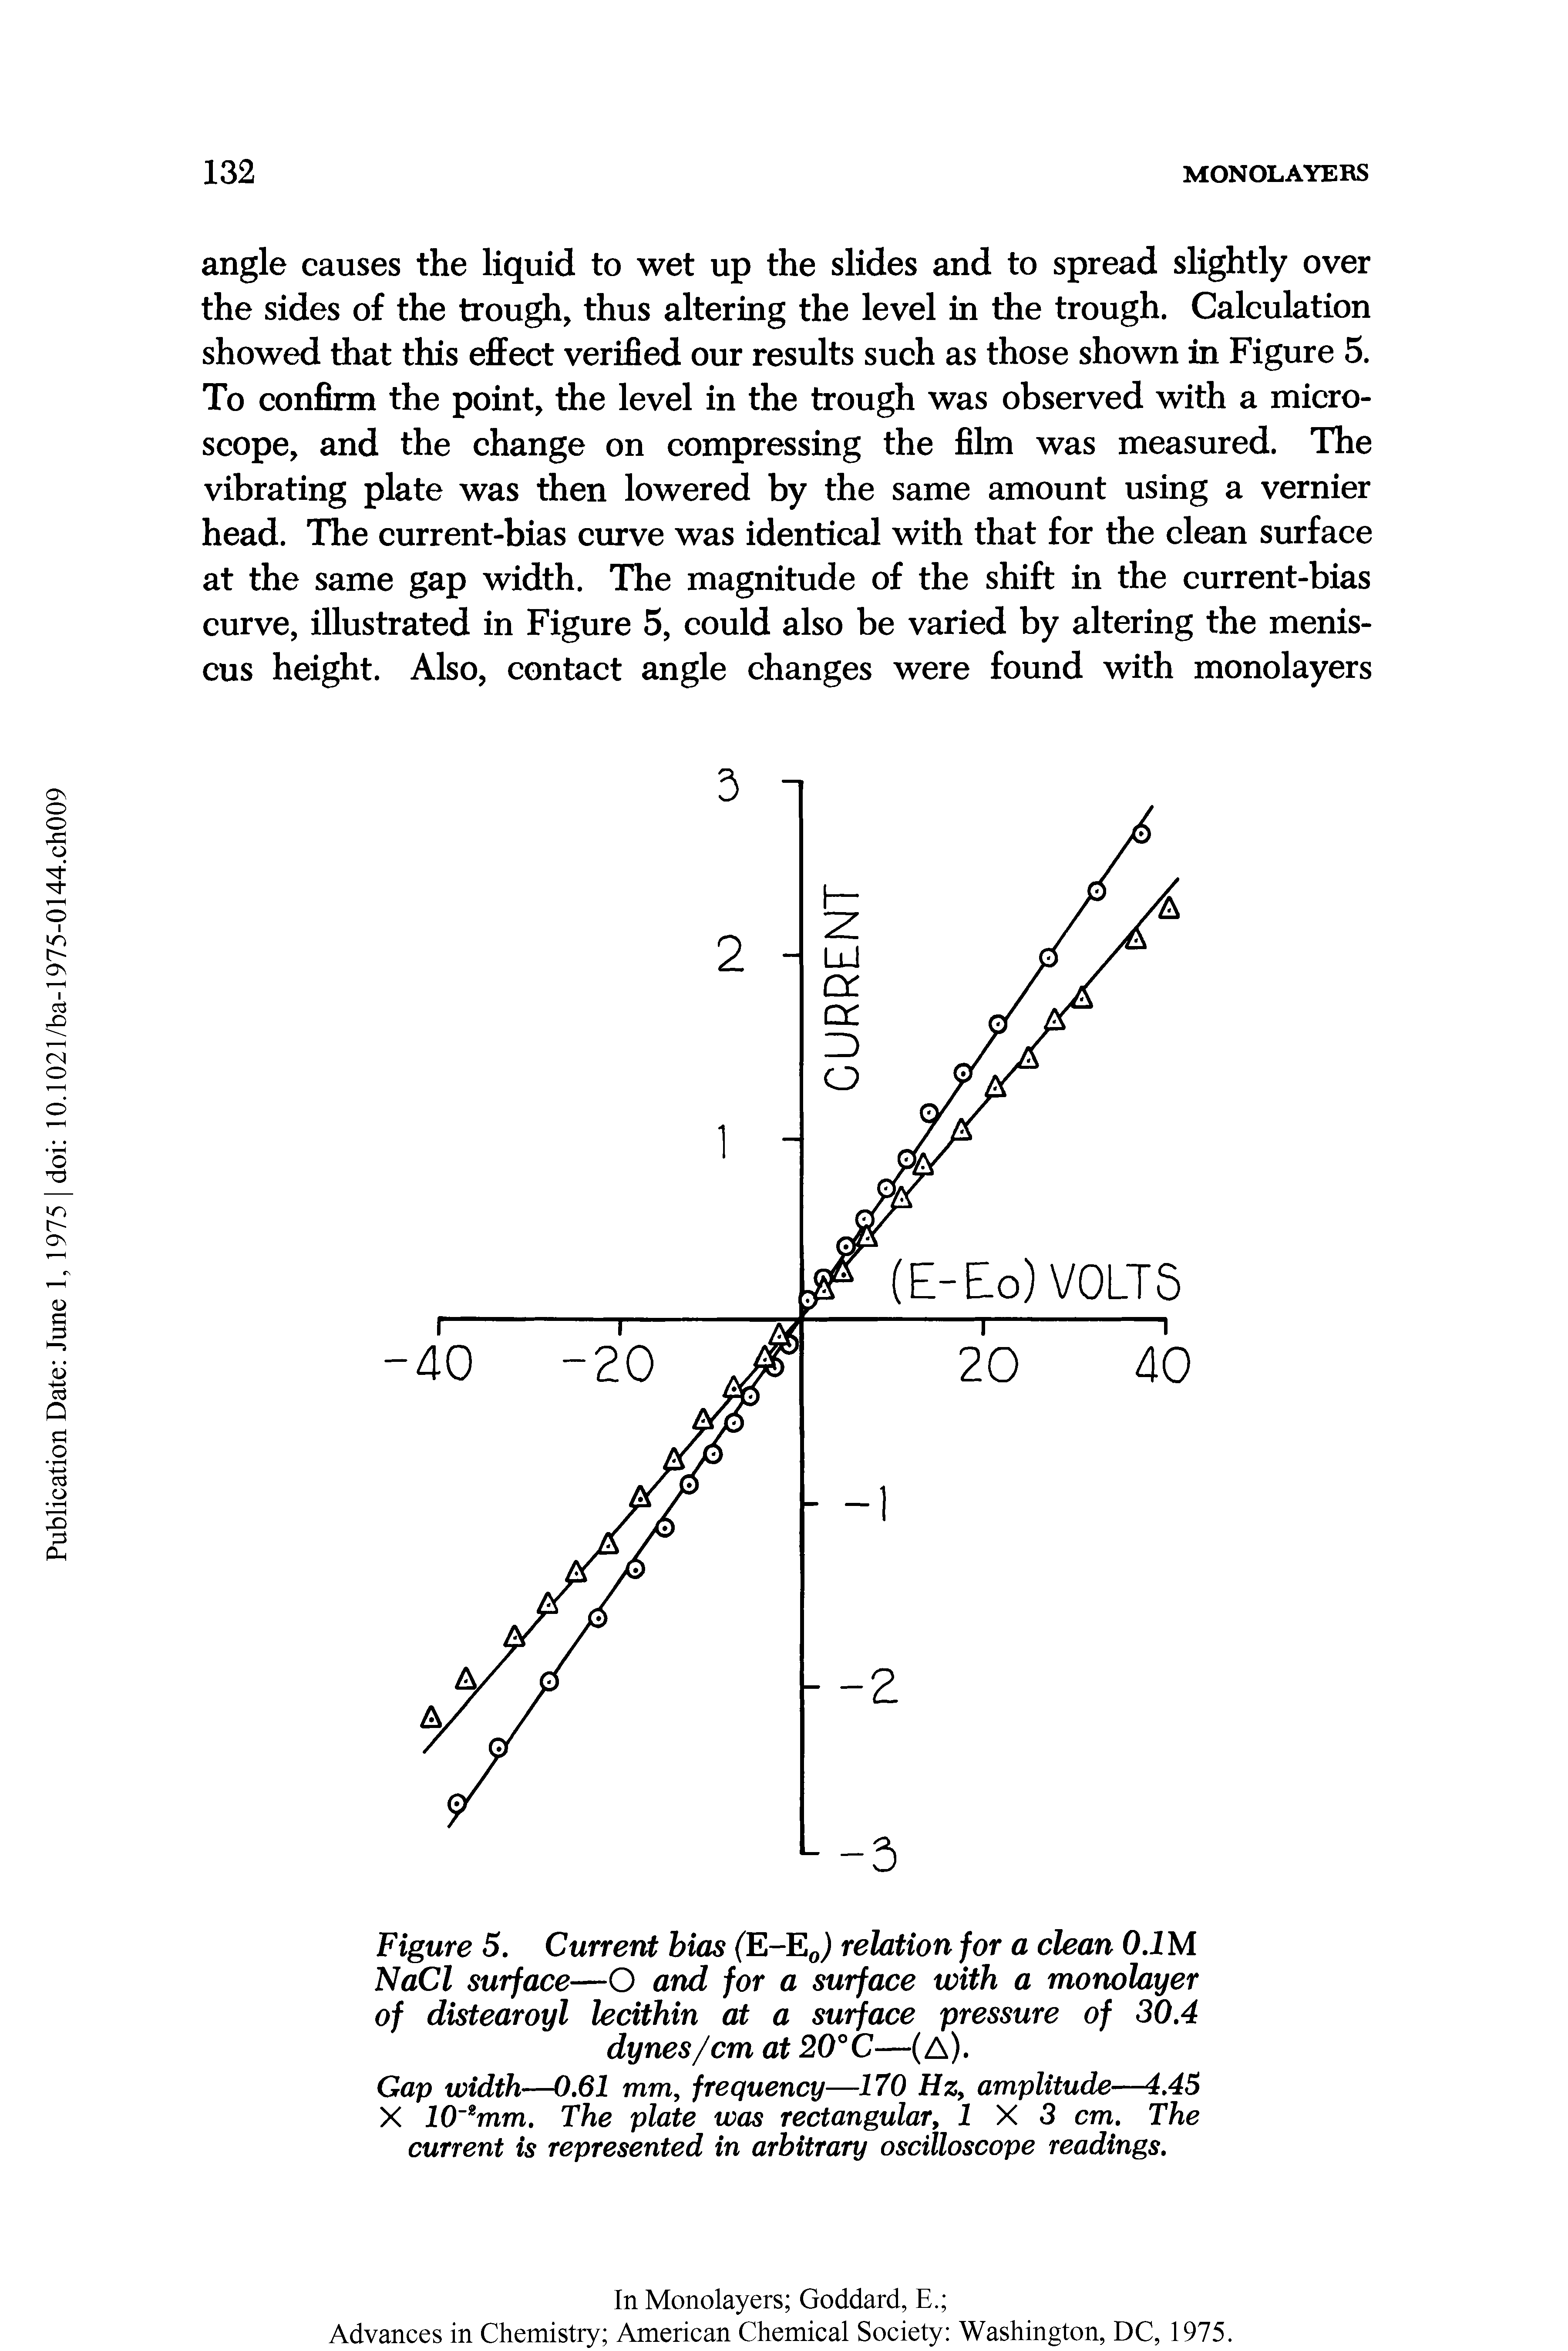 Figure 5. Current bias (E-EJ relation for a clean 0.1M NaCl surface—O and for a surface with a monolayer of distearoyl lecithin at a surface pressure of 30.4 dynes/cm at 20°C—(A).